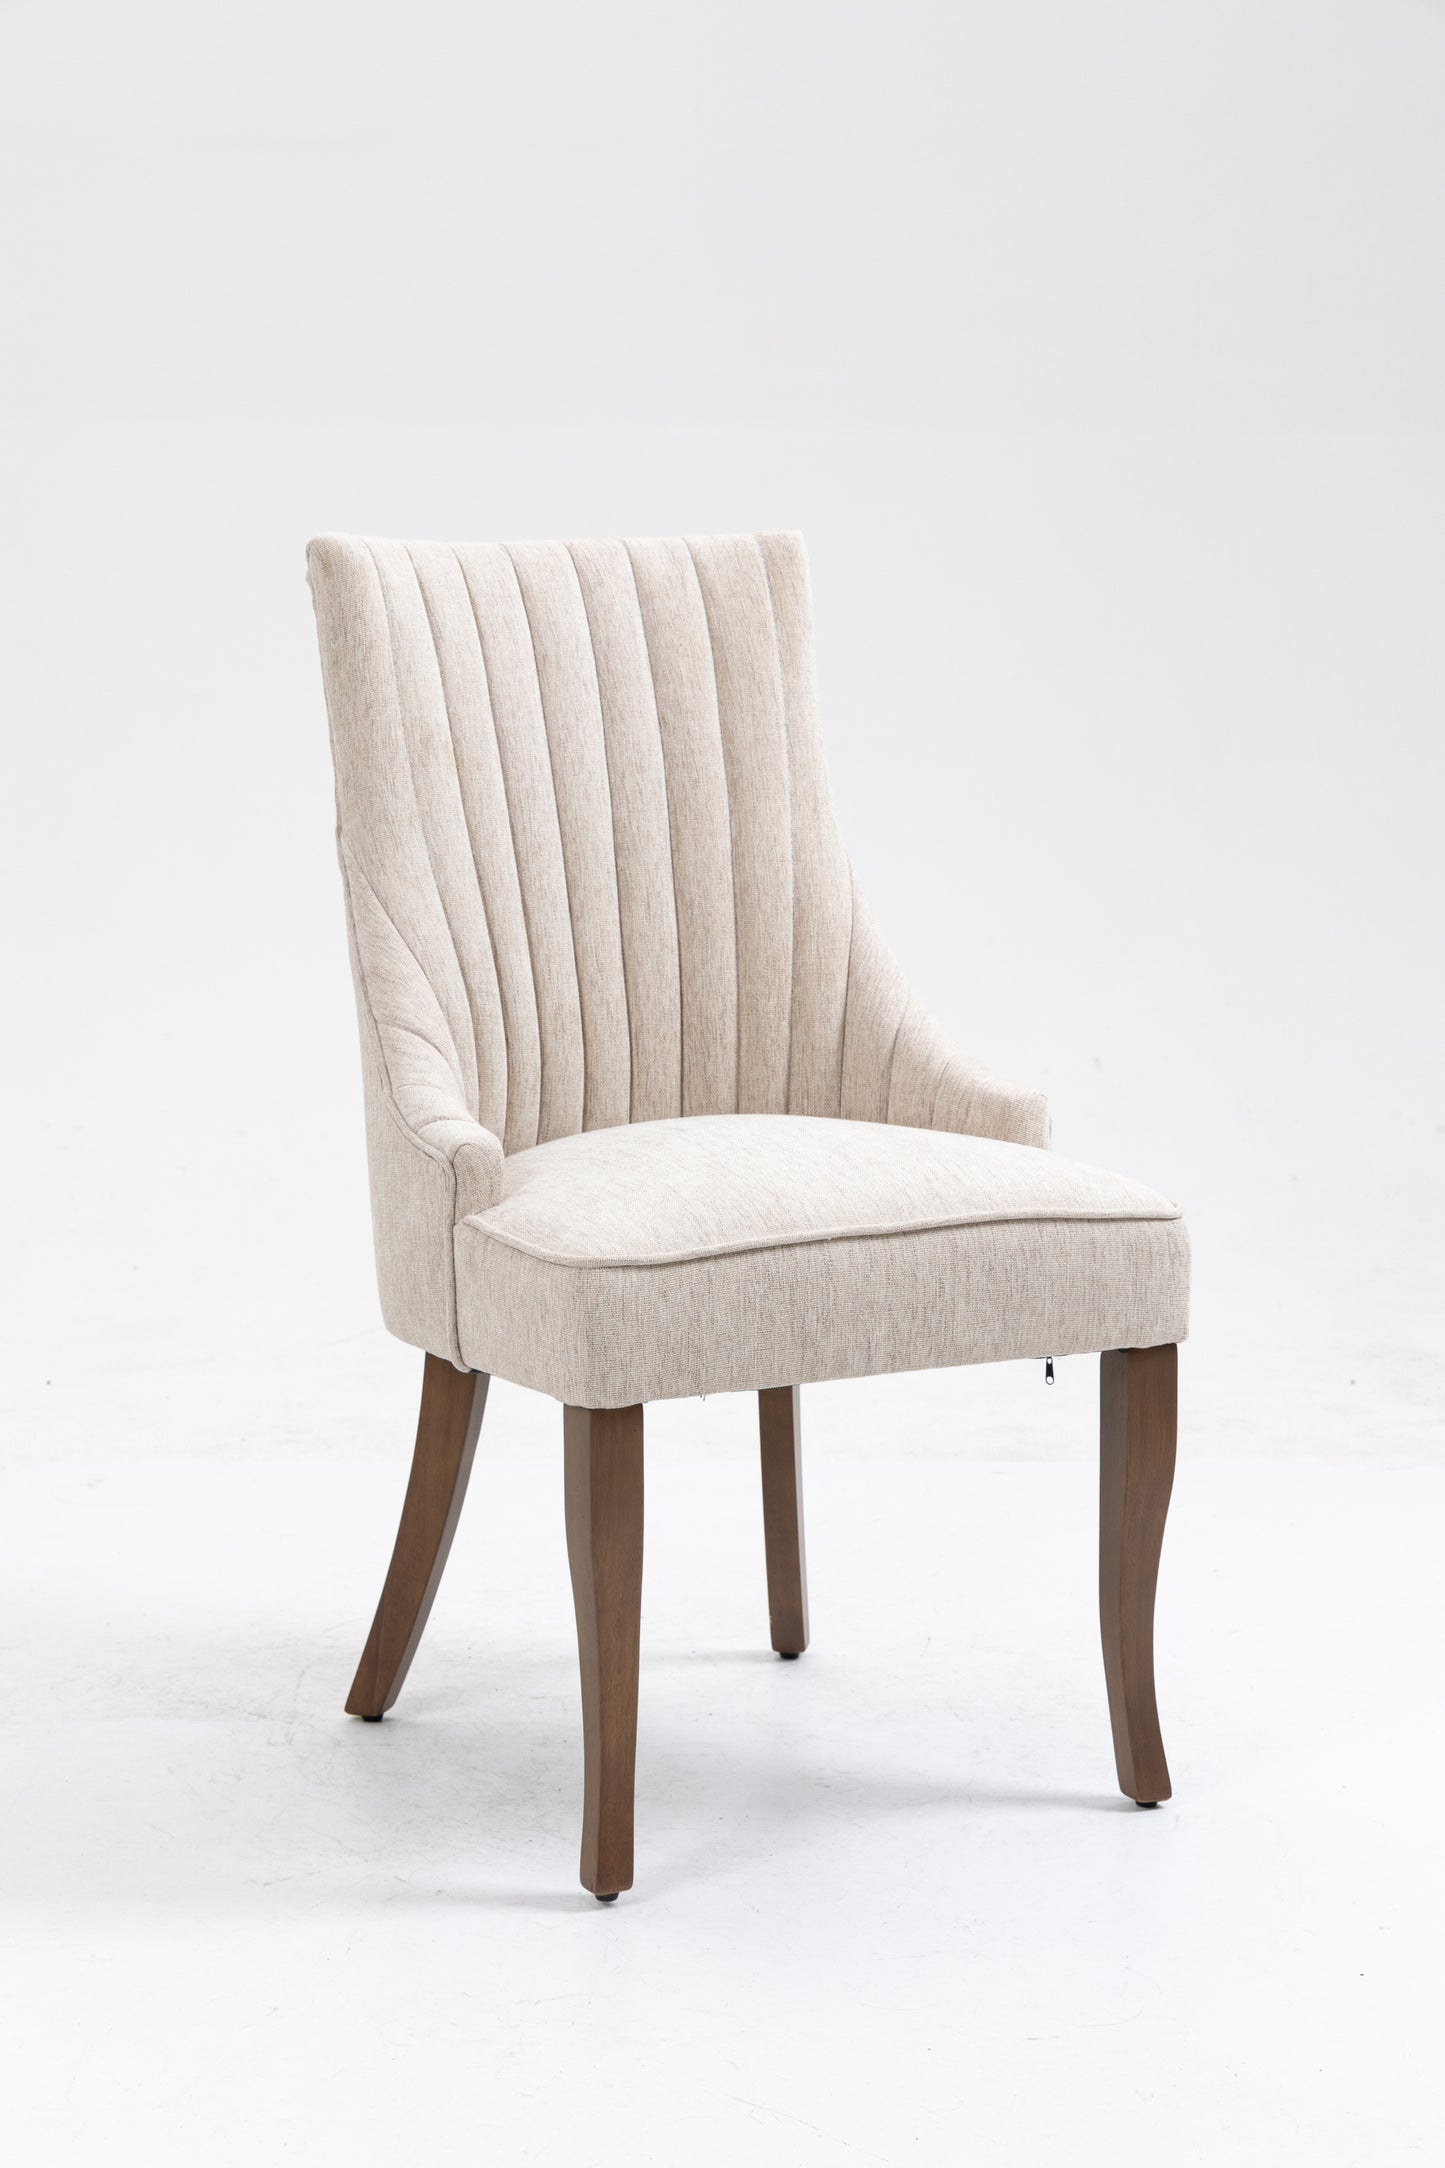 Exquisite Cream Linen Fabric Upholstered Strip Back Dining Chair with Solid Wood Legs 2 Pcs